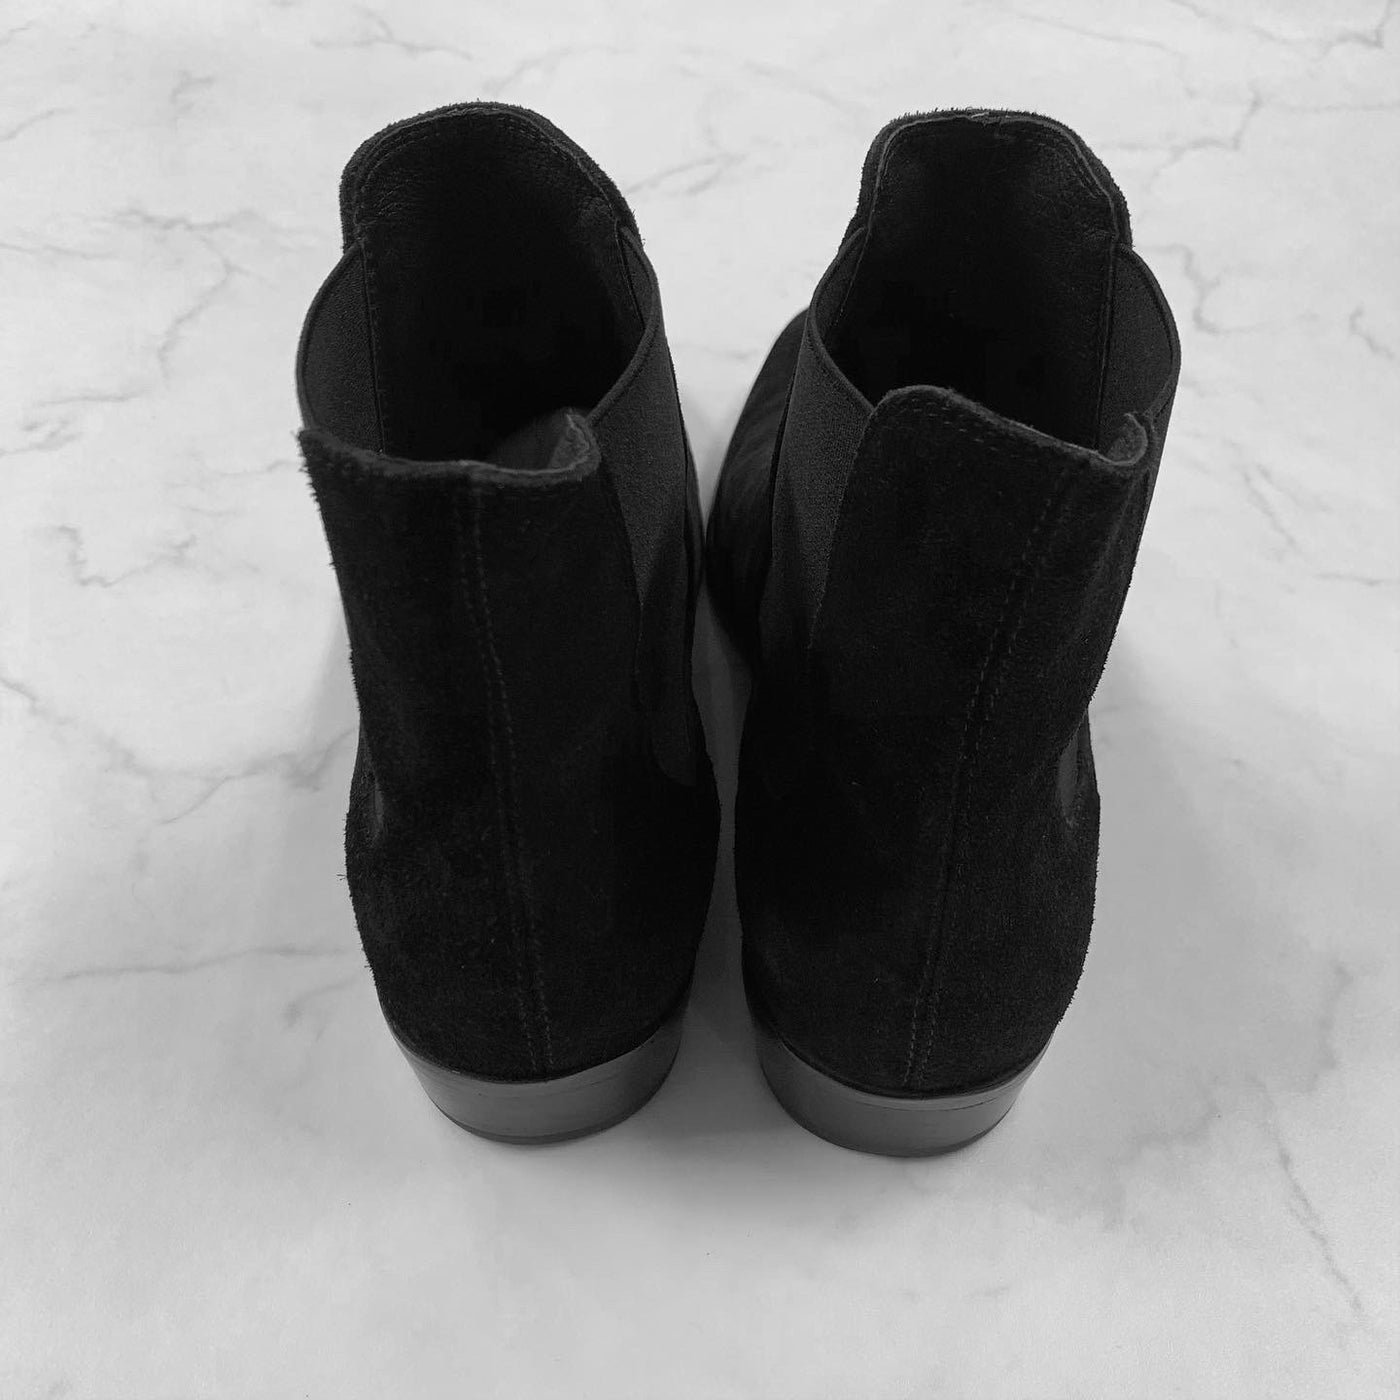 [Instant delivery]"Suede side gore boots"Suede side gore boots (black)